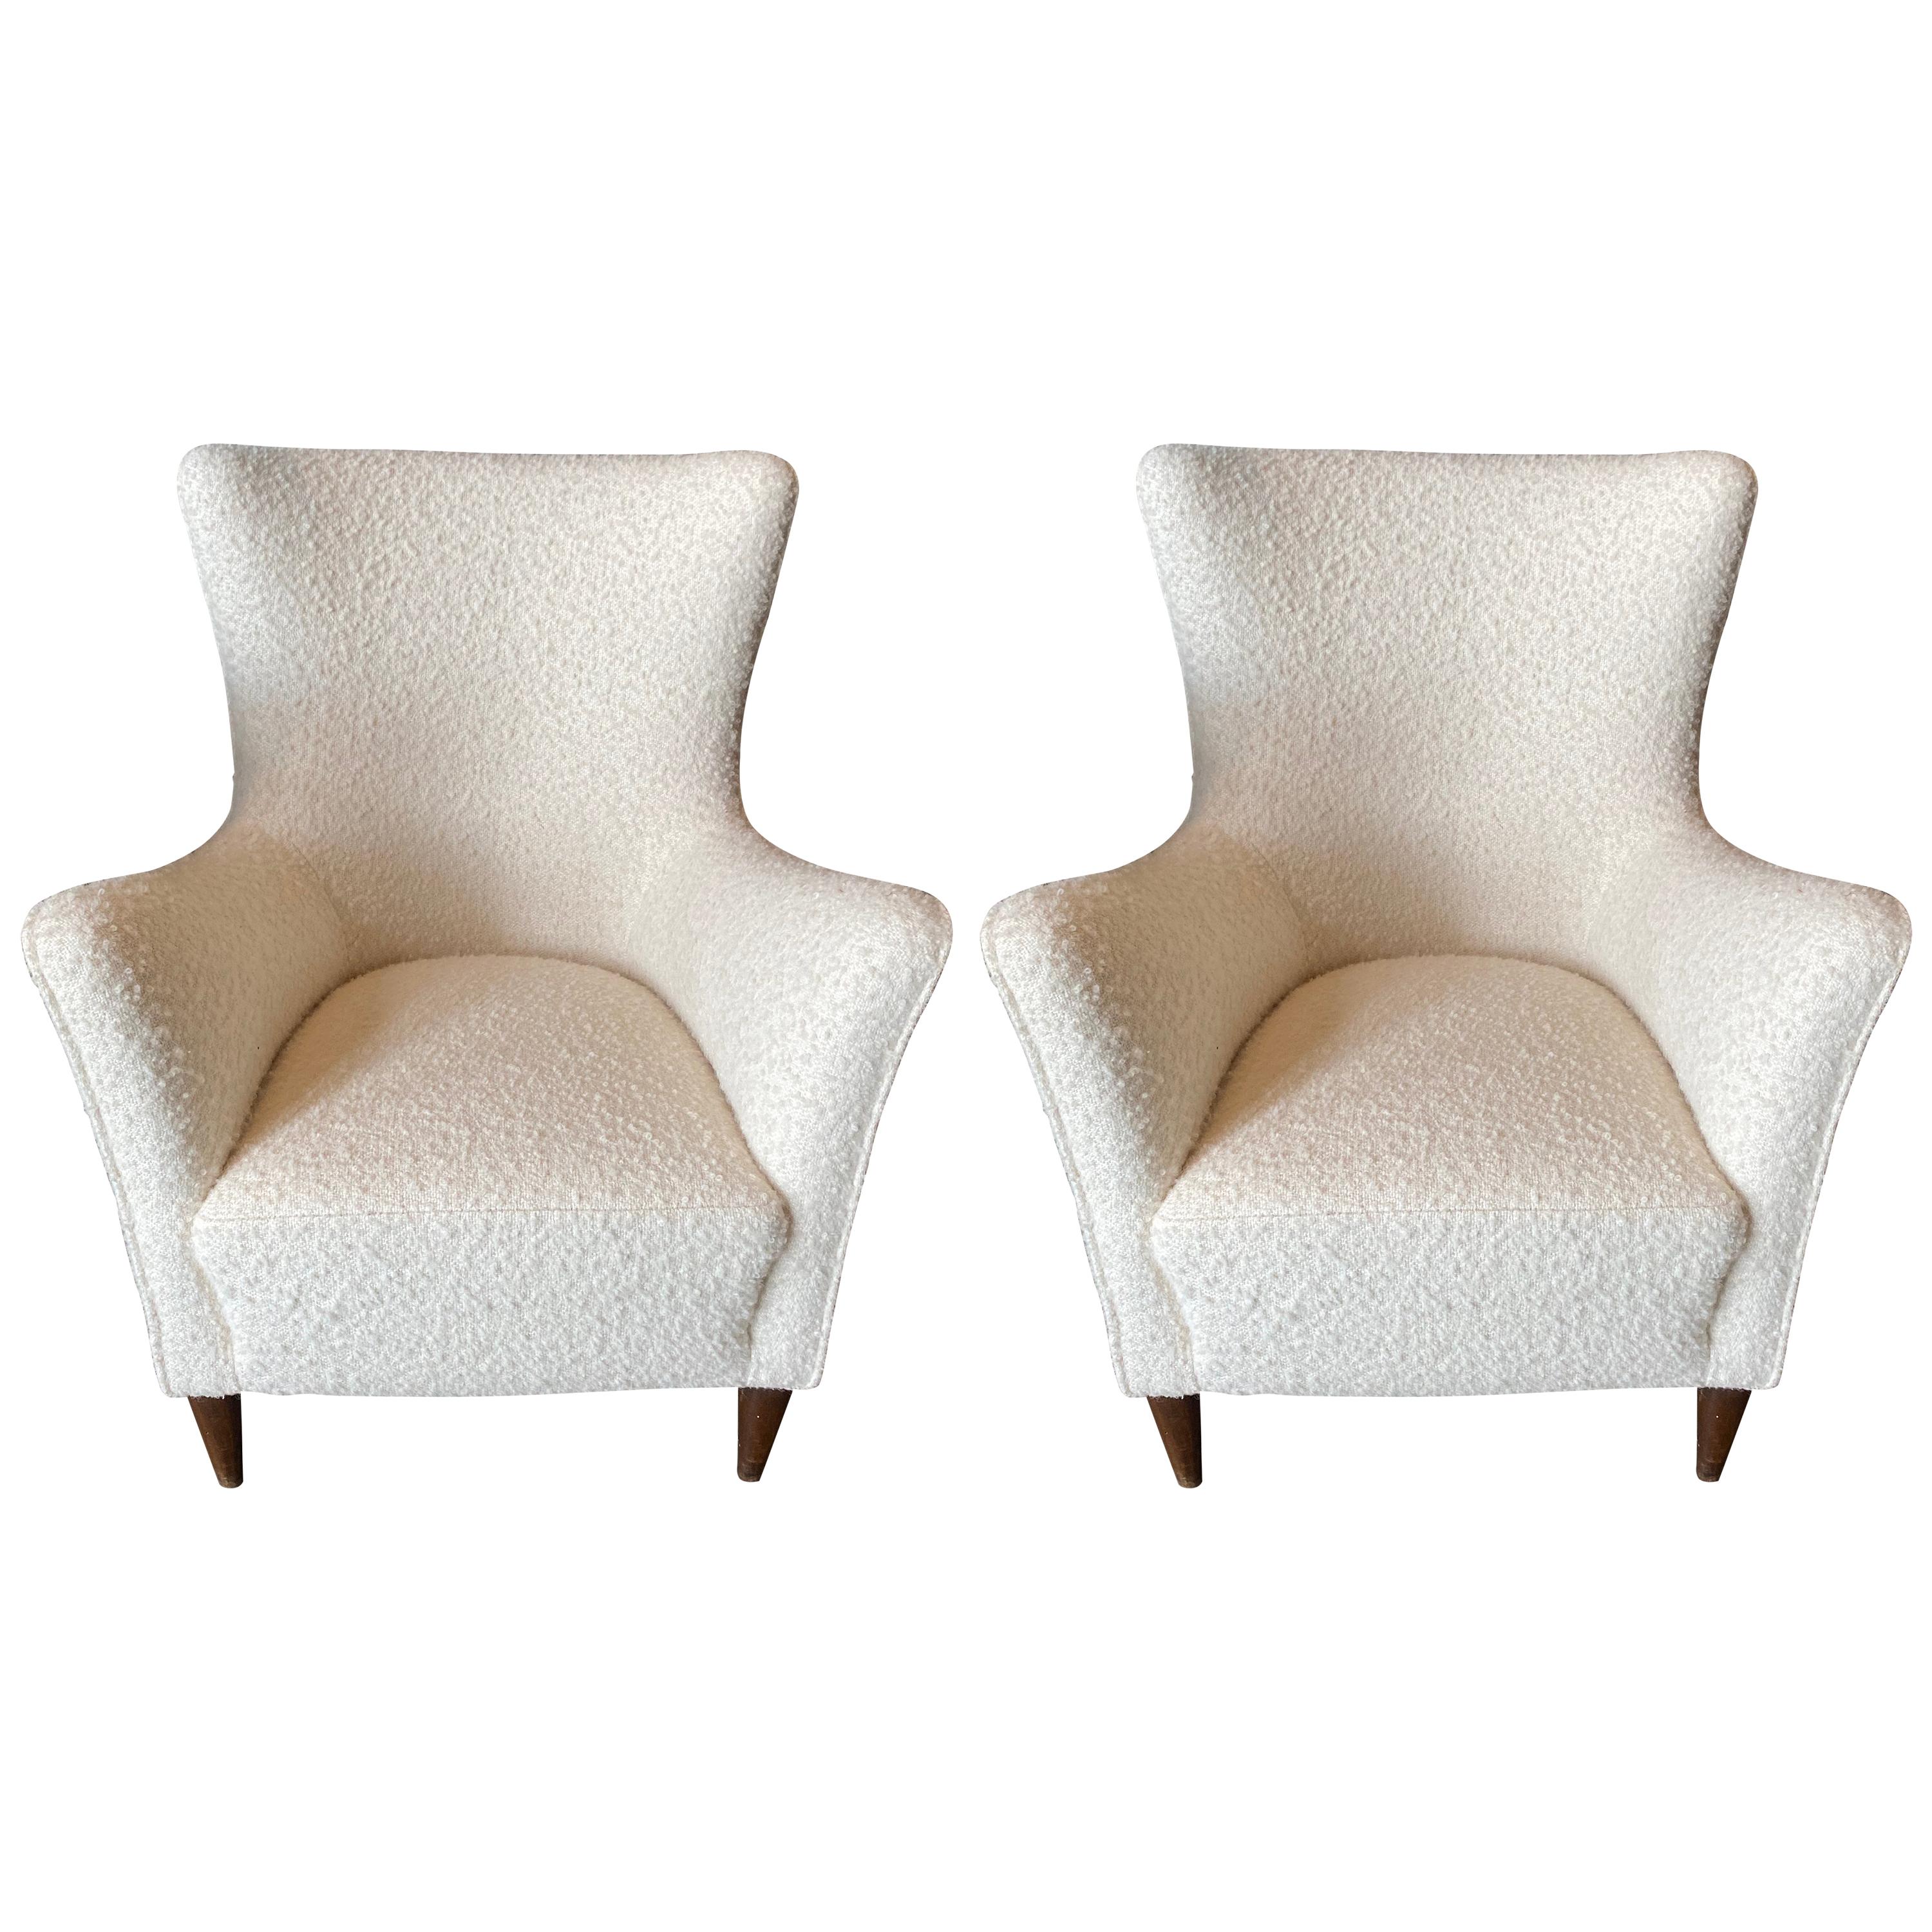 Pair of Italian Mid-Century Wingback Chairs in Creamy White Boucle